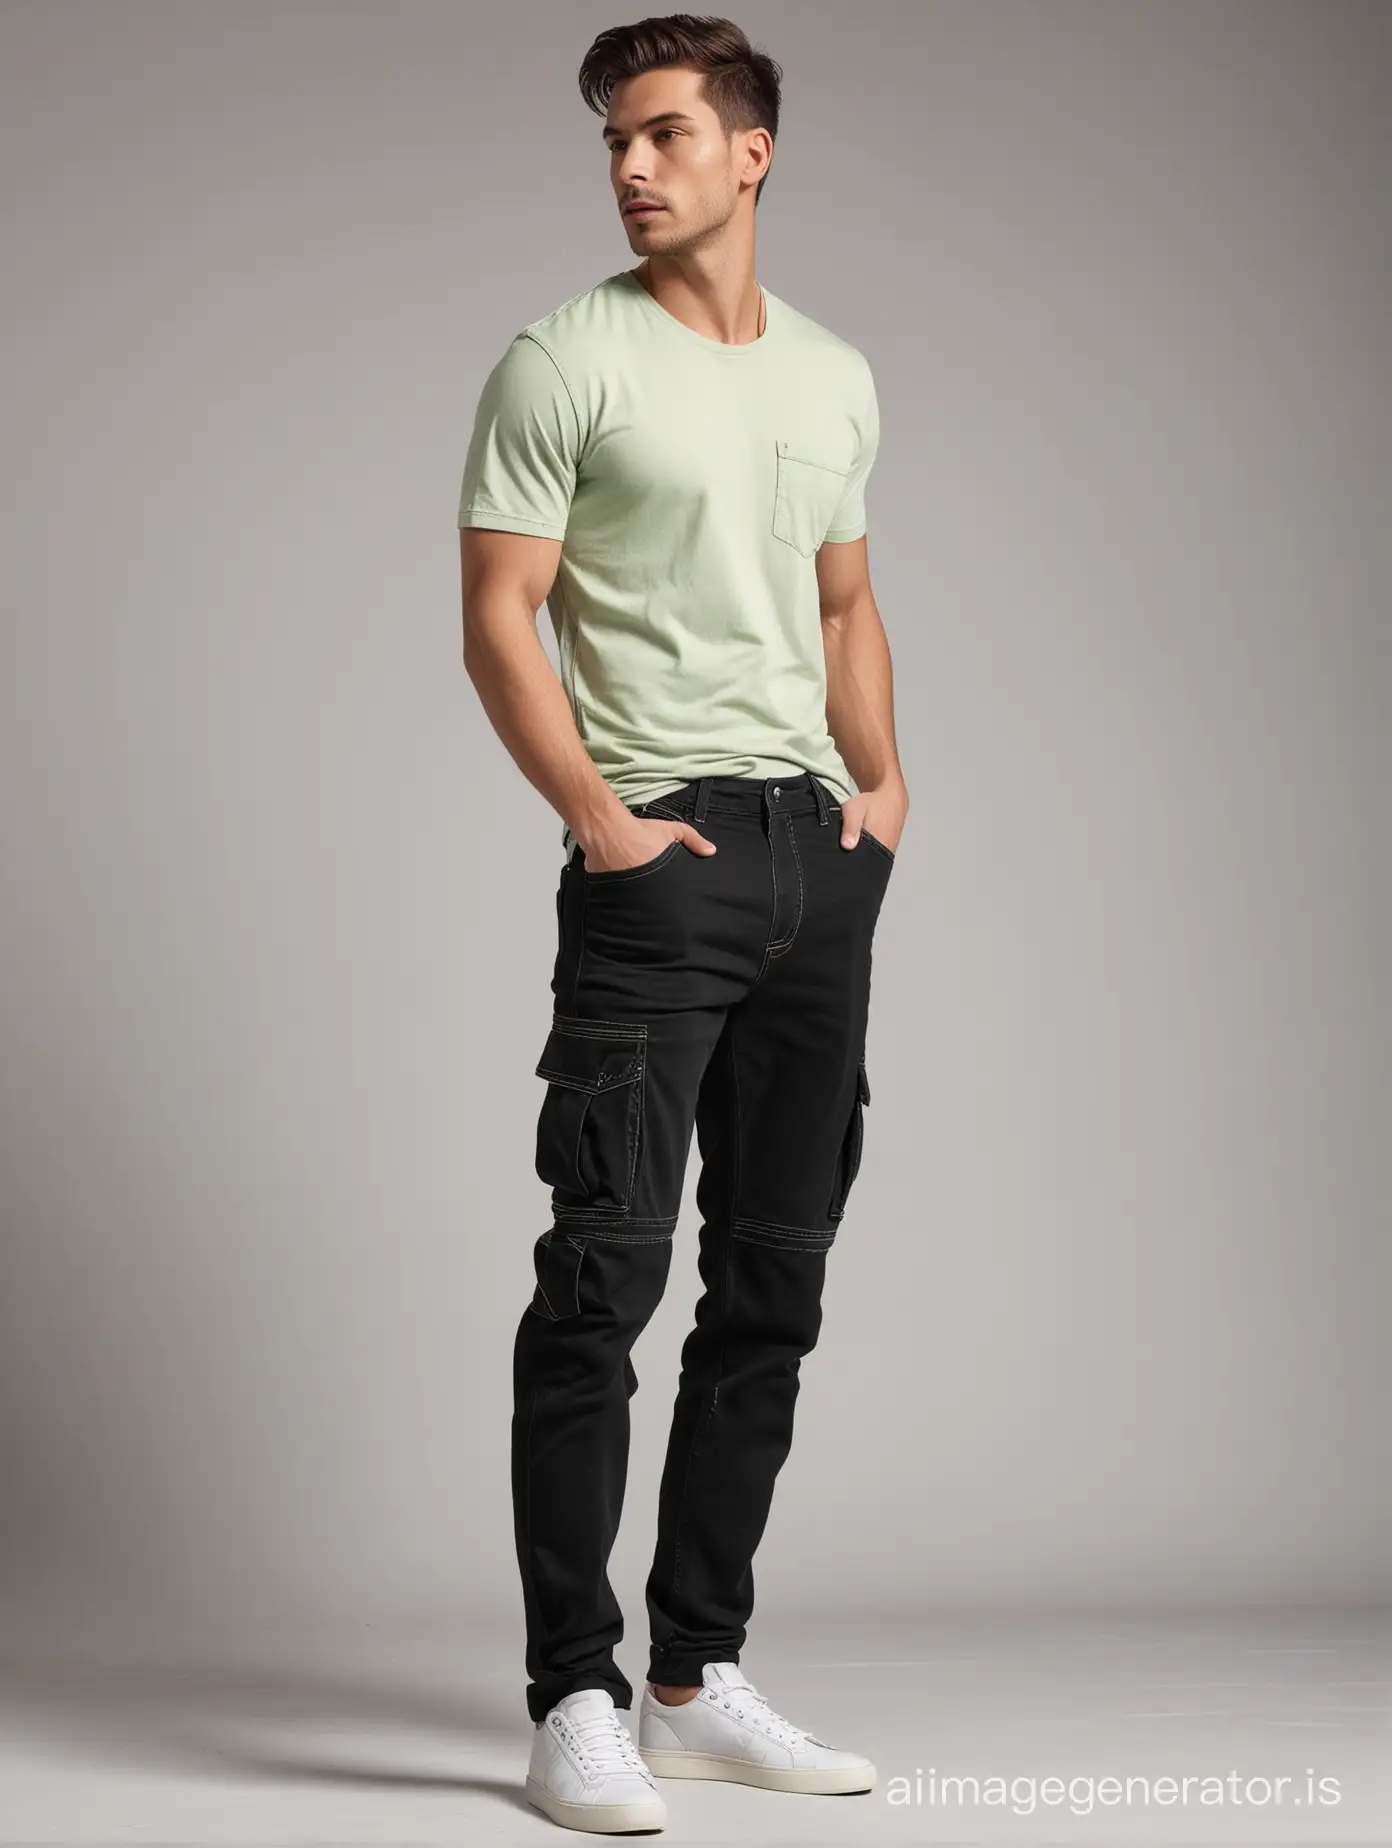 Create an image of a man wearing cargo denim Combined Light green & Mid night BLACK  color jeans with contrast stitching , extra utility  off white  BACK pocket and smooth fabric texture with  trouser look straight crease with Dutch angle look.